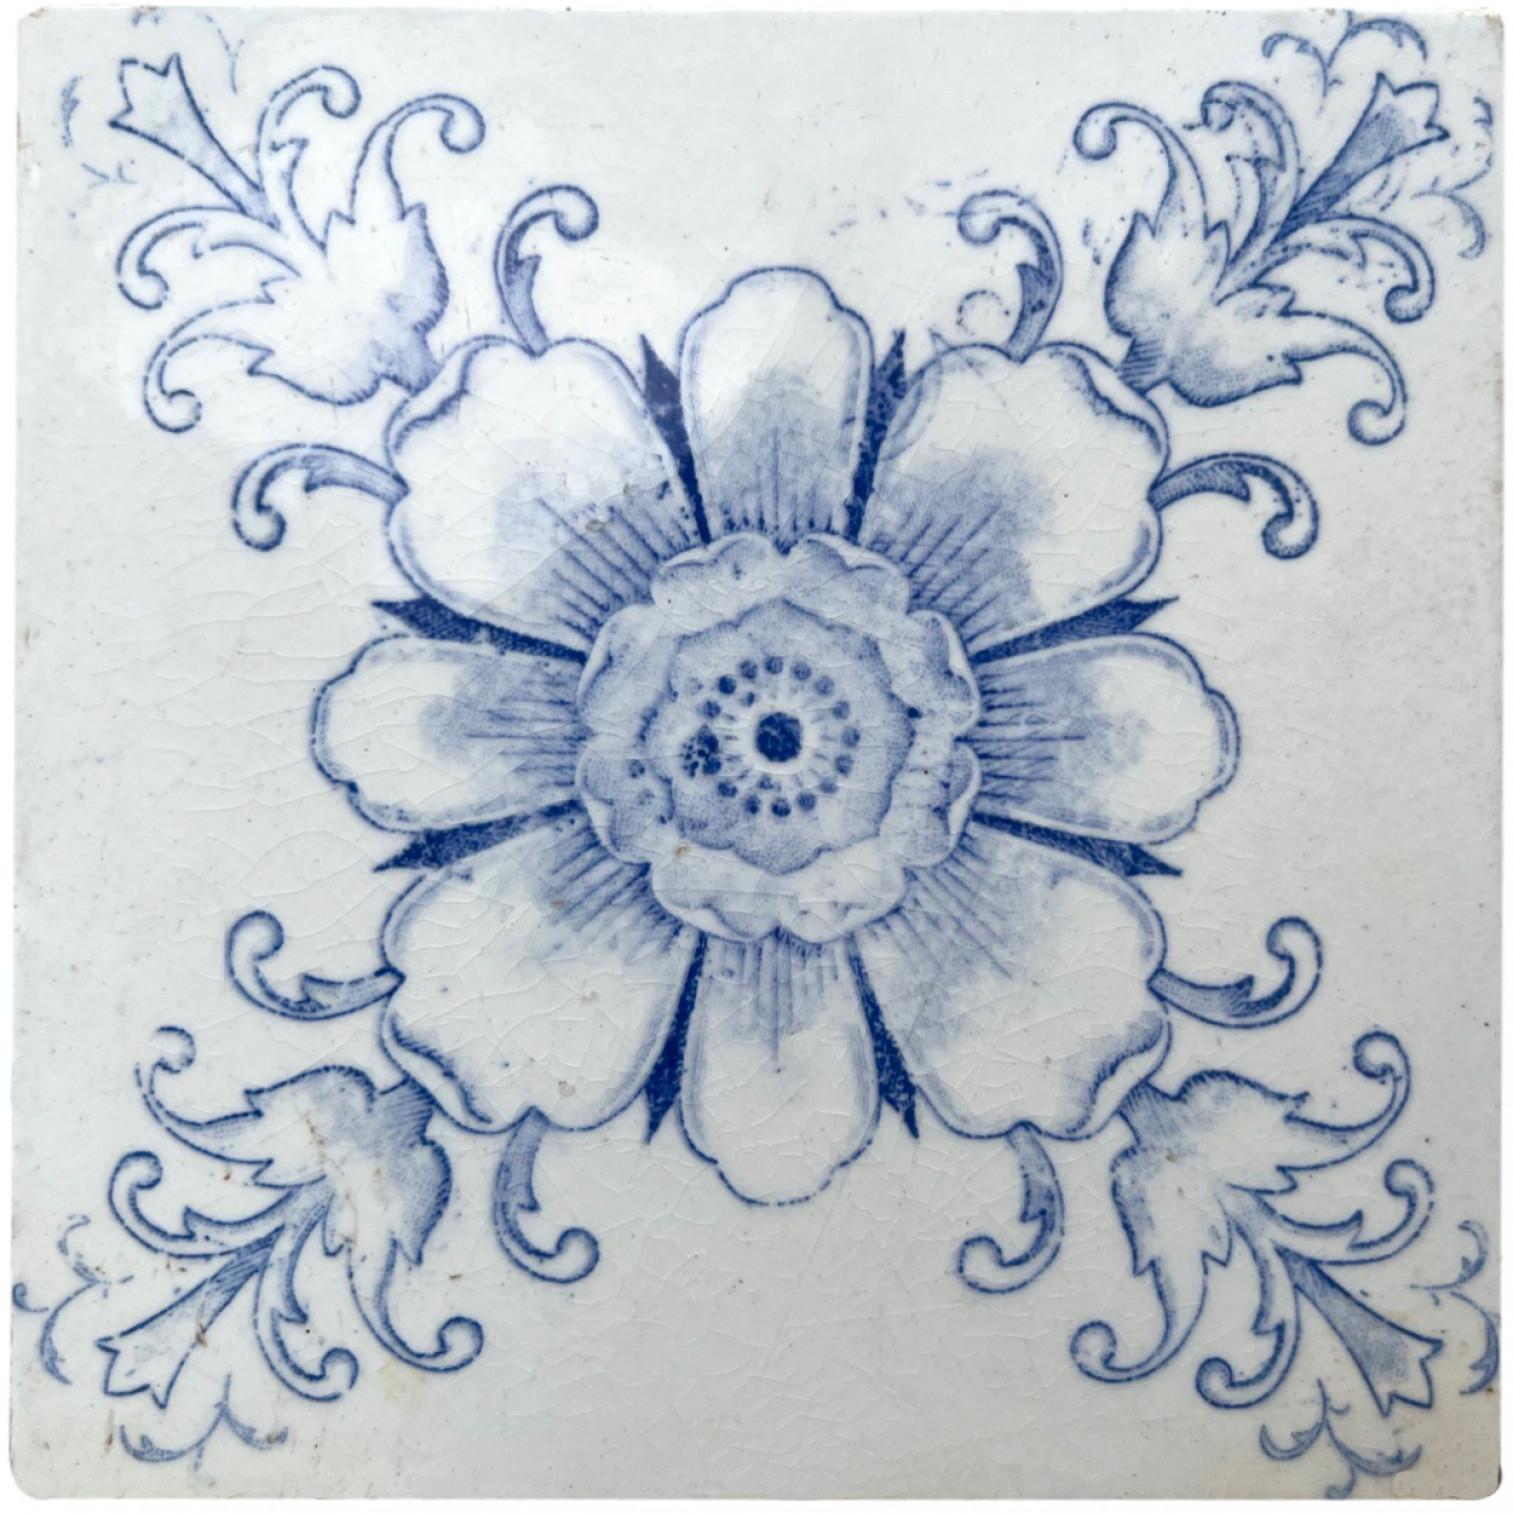 Handmade tiles in white and blue glazed color. With an illustration of a large flower and some leaves. Manufactured around 1920 by Le Glaive, Belgium.
These tiles would be charming displayed on easels, framed or incorporated into a custom tile